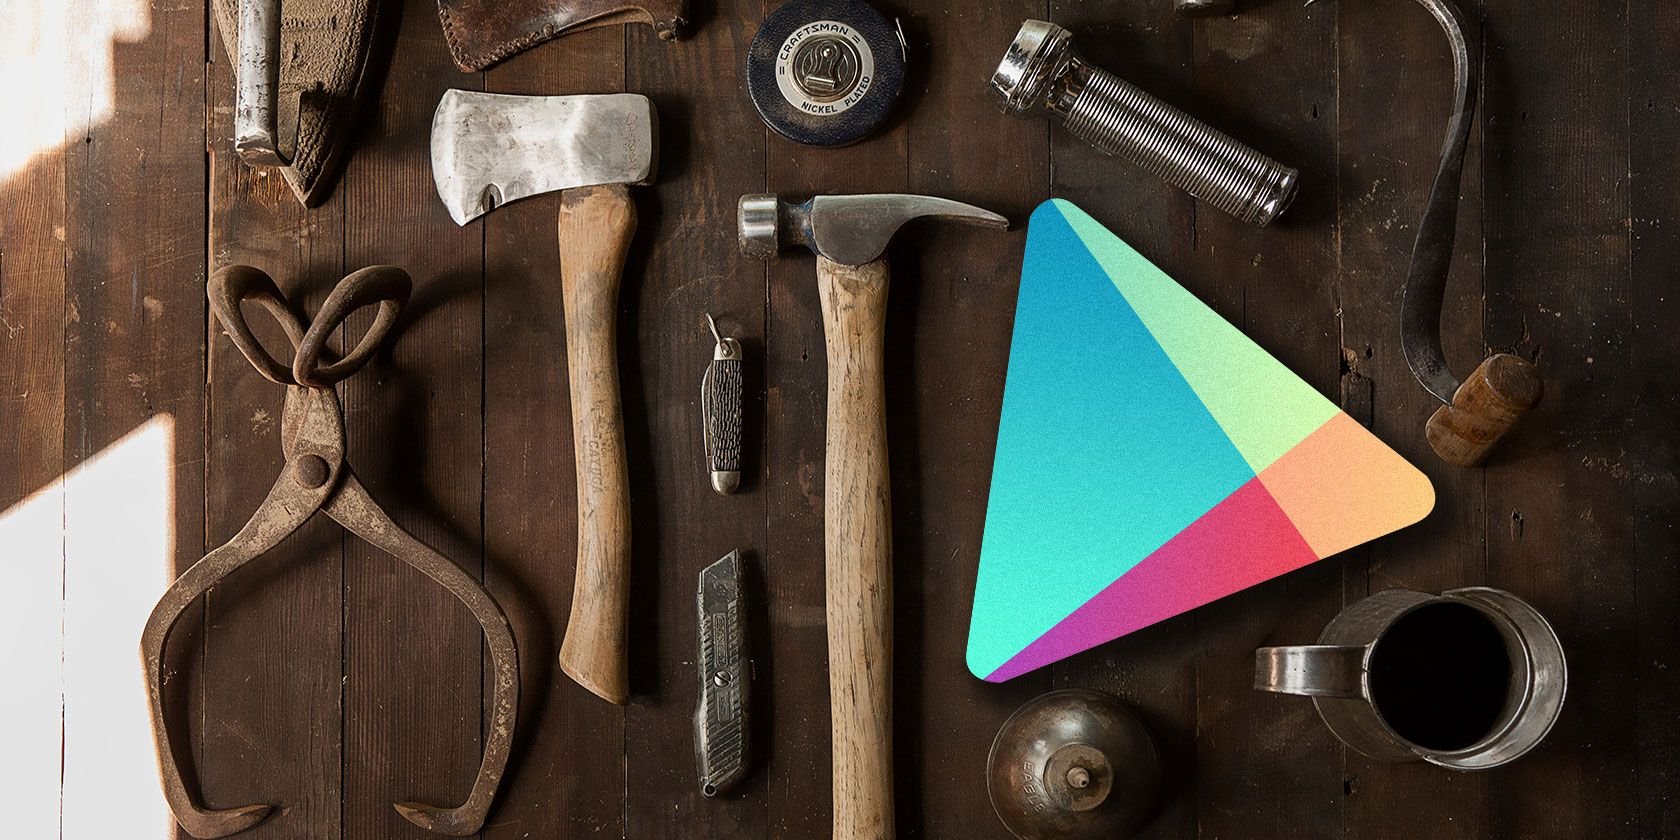 How to Fix "Check Your Connection and Try Again" in Google Play Store